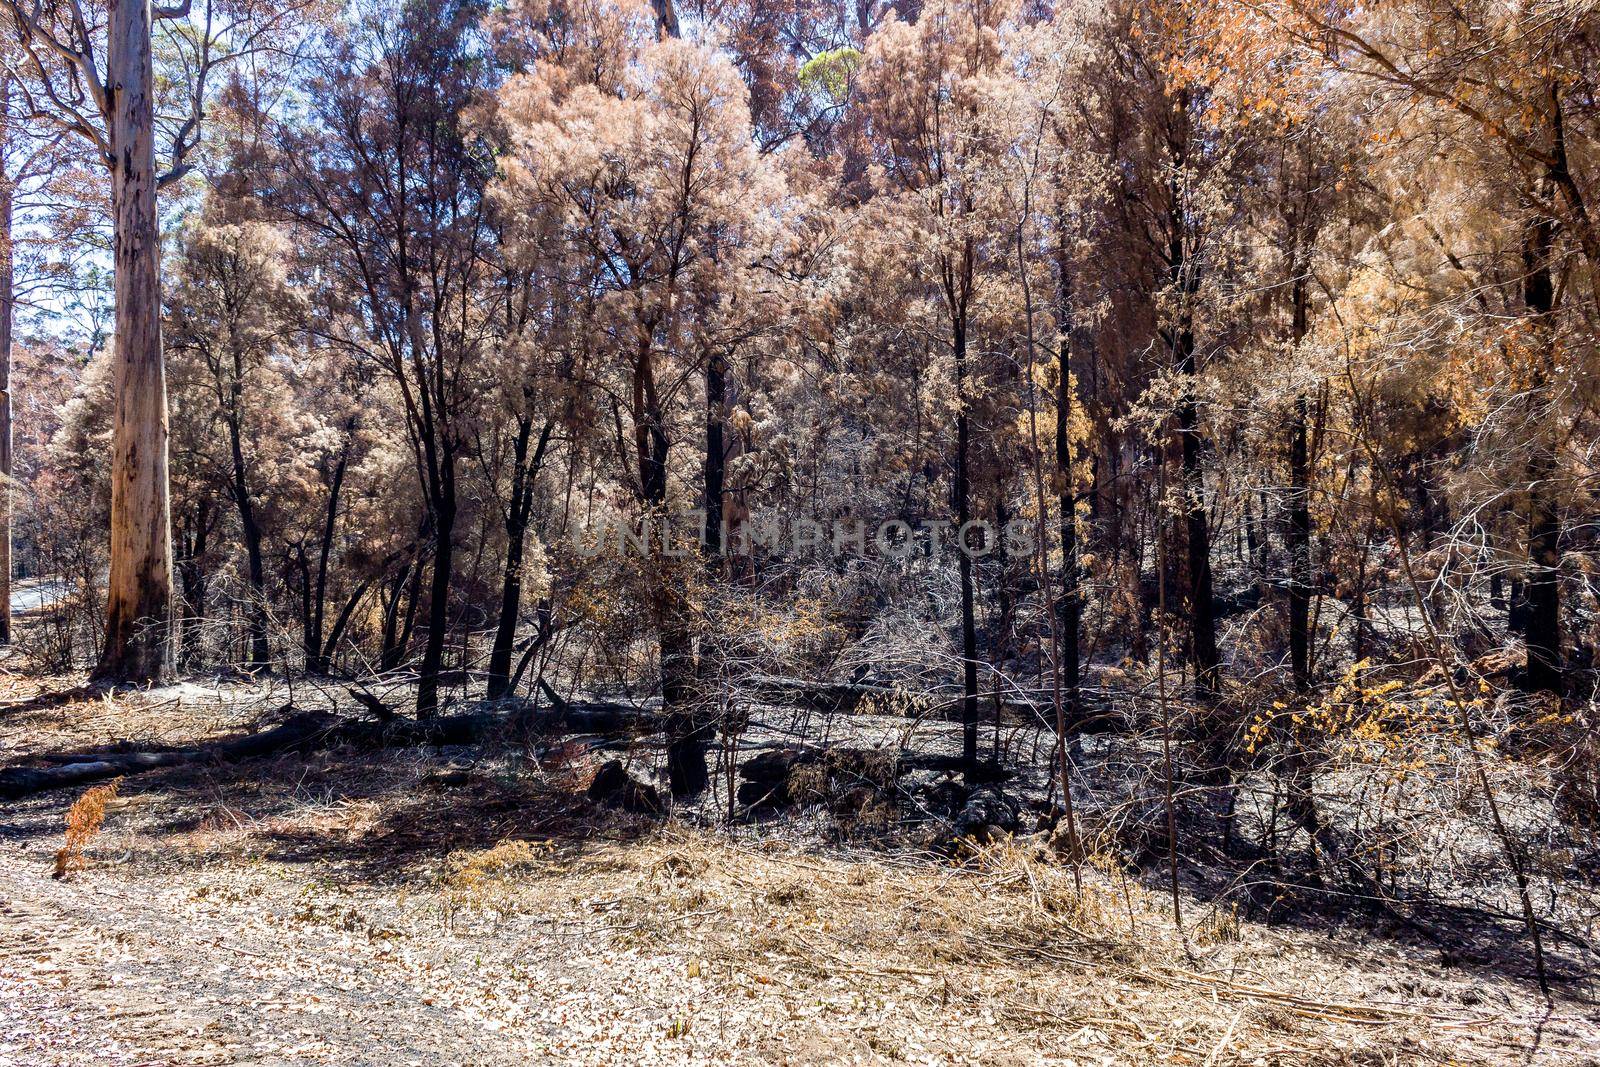 Australian forest after the serious bushfire in Mount Frankland South Natiional Park, near Walpole, Australia by bettercallcurry